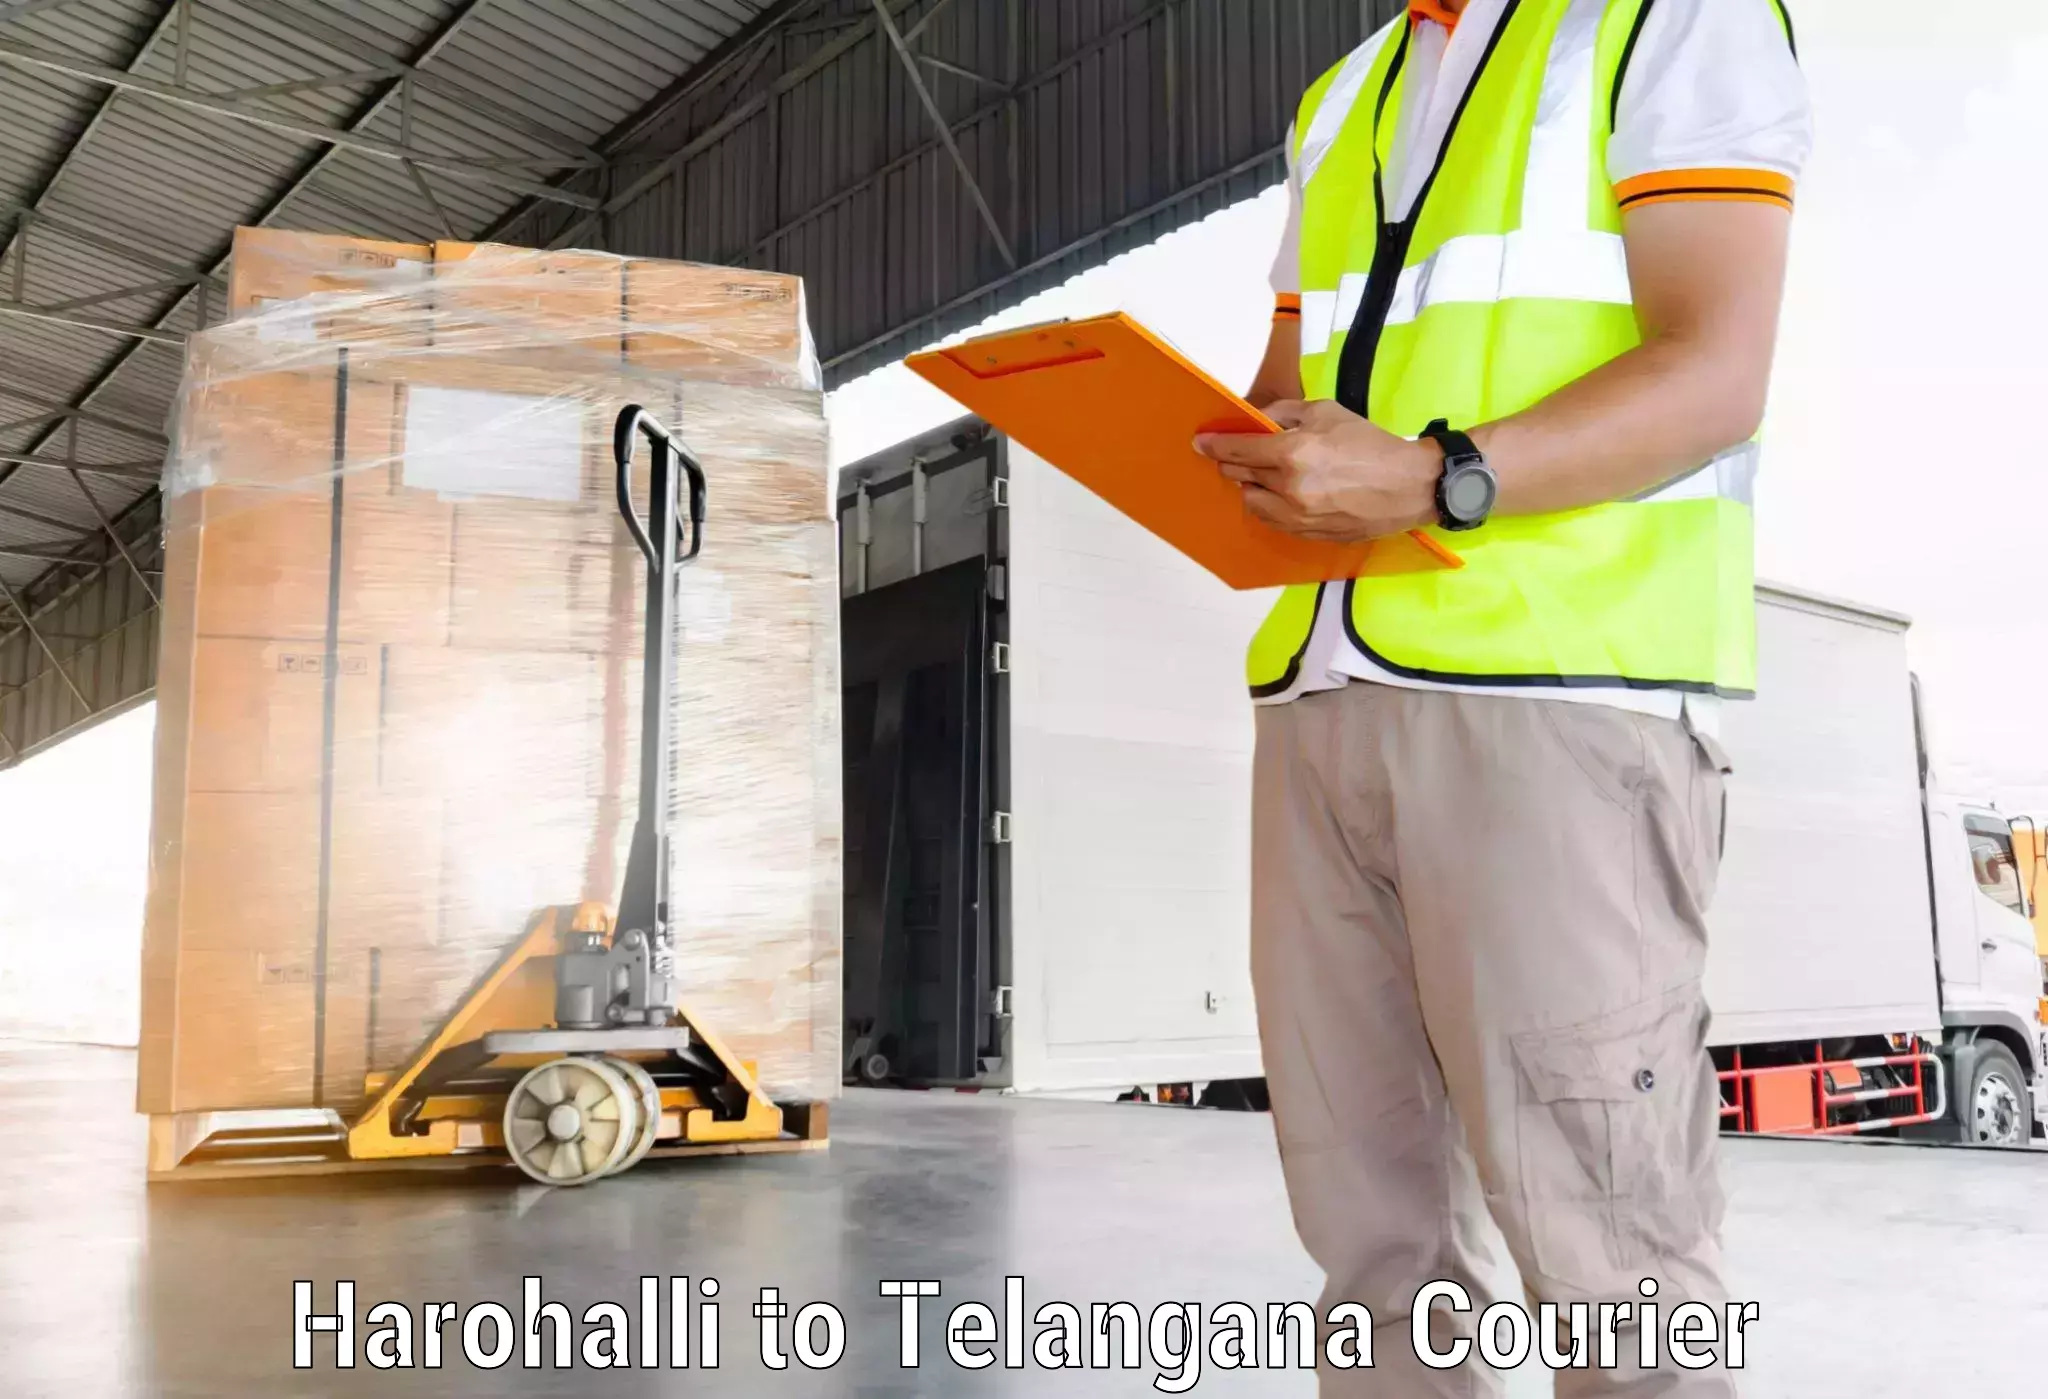 Expedited parcel delivery in Harohalli to Gollapalli